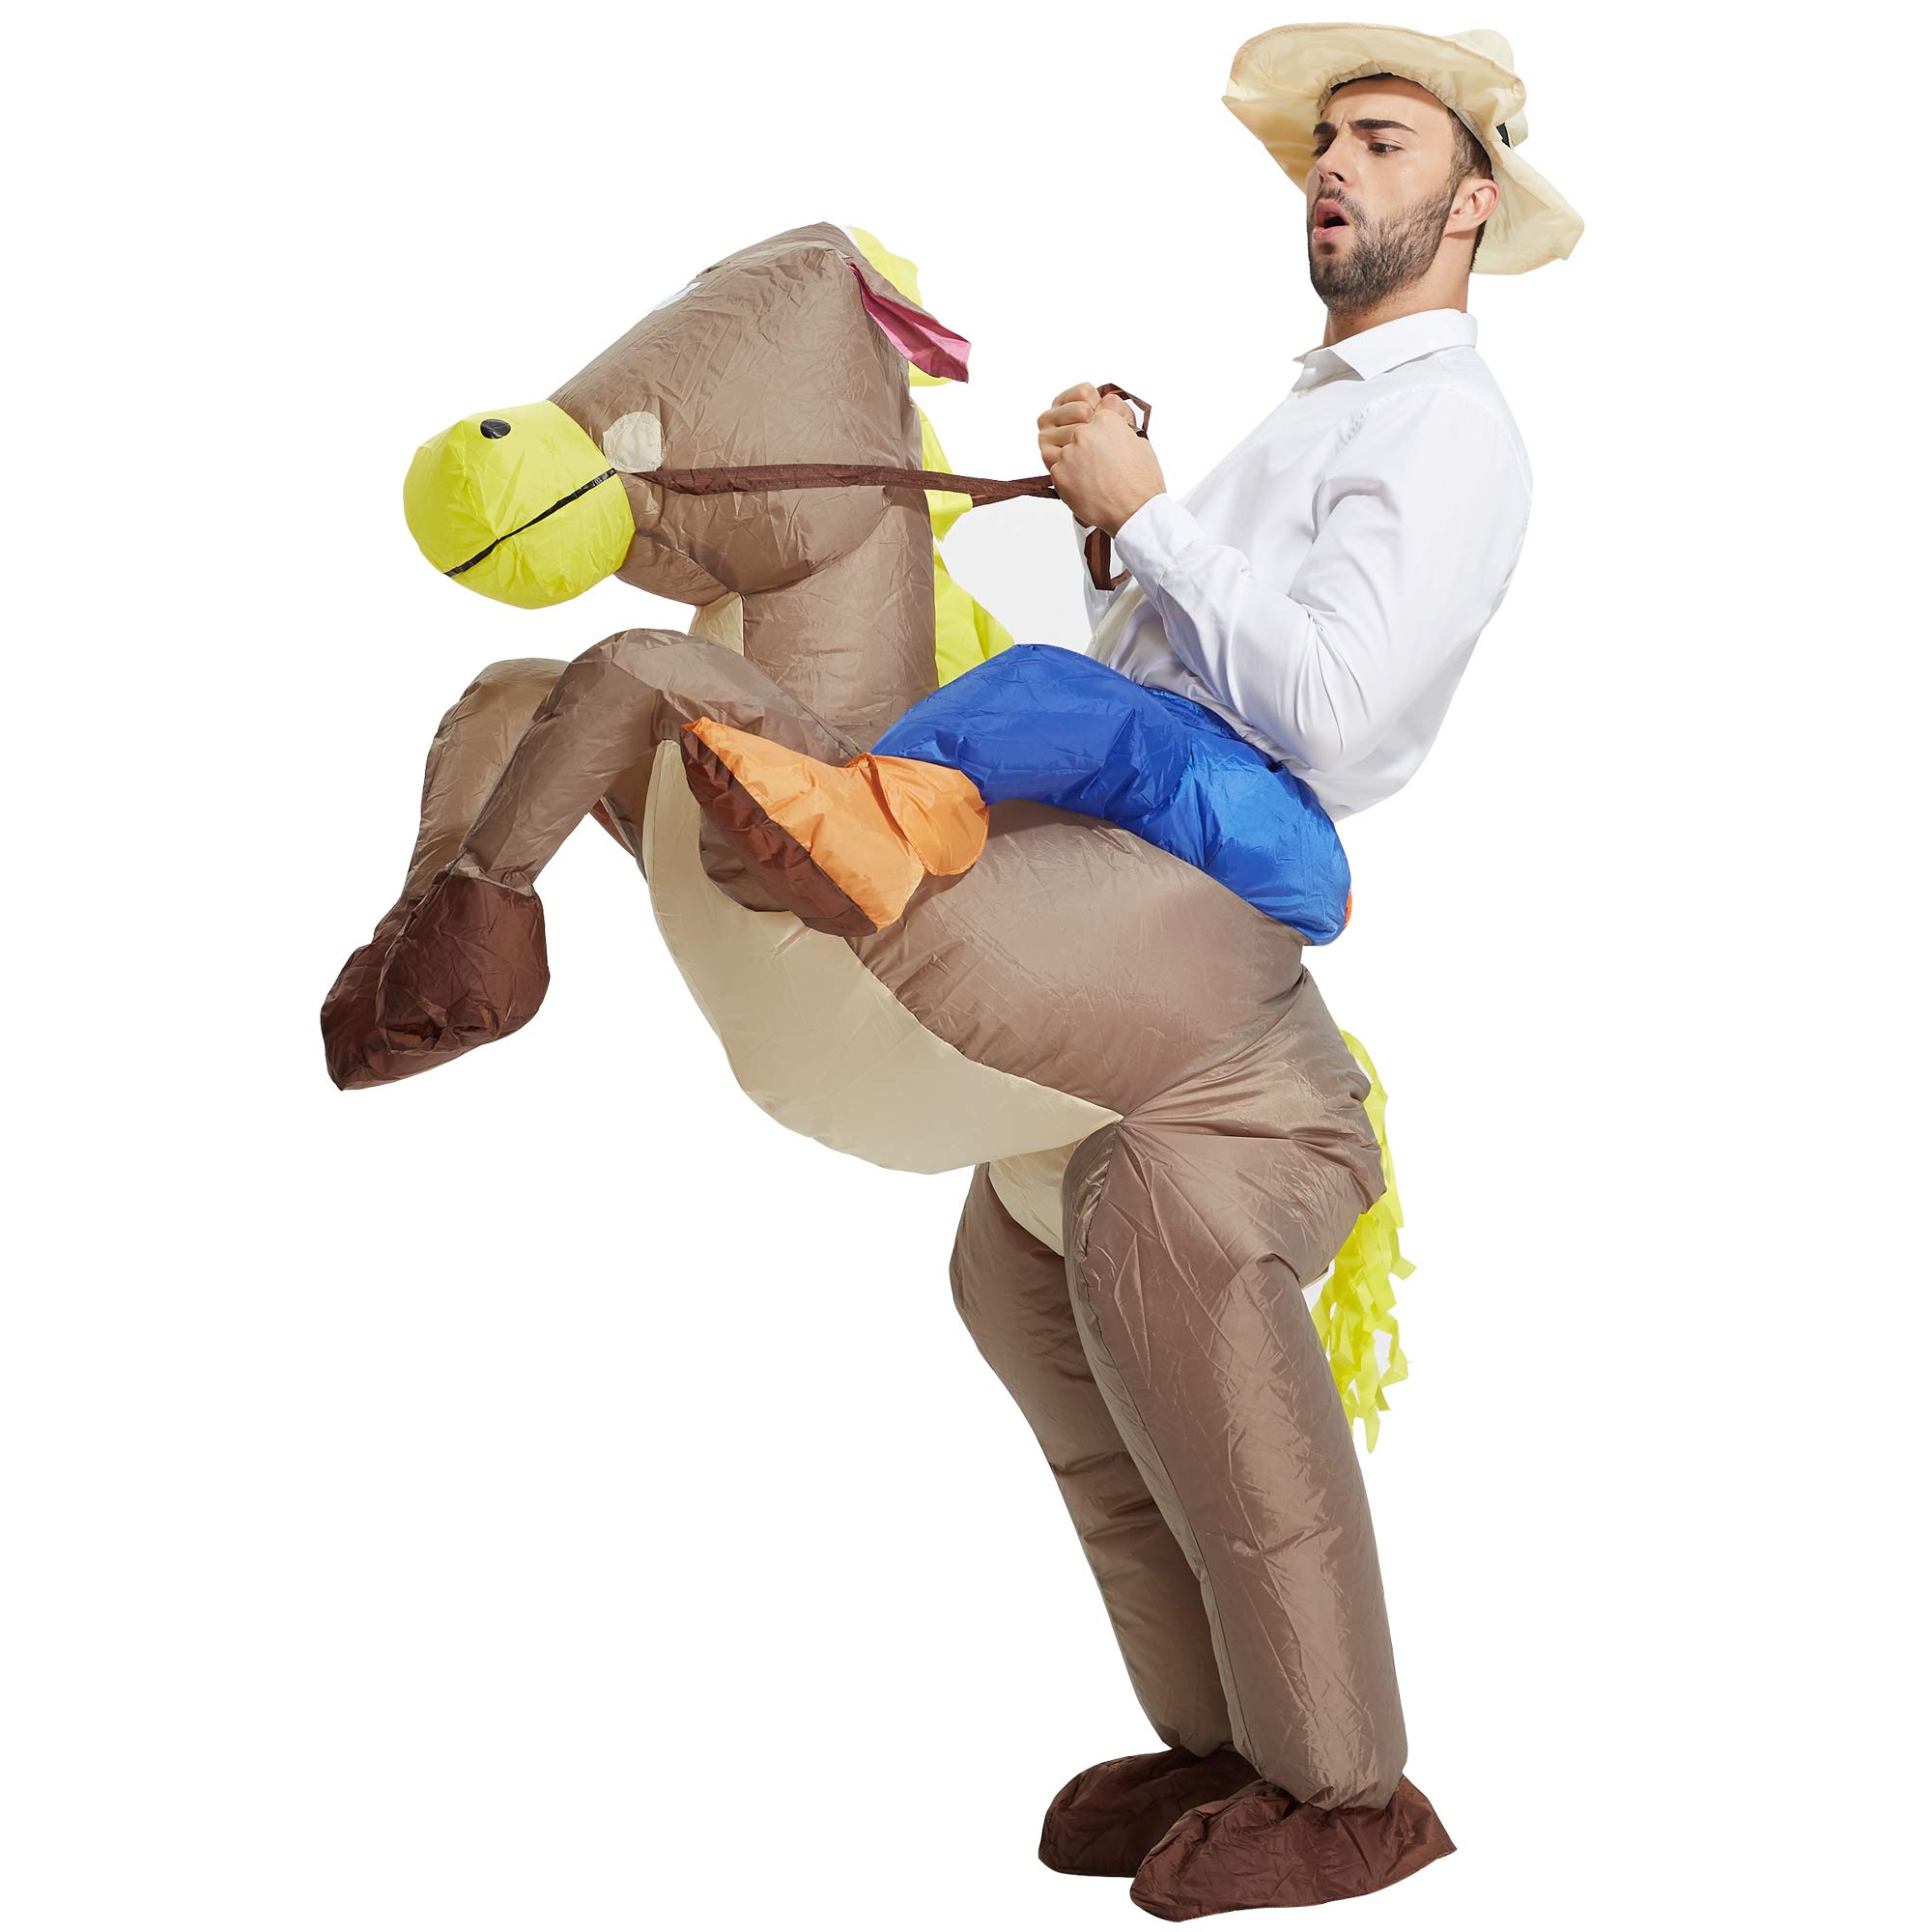 TOLOCO Inflatable Costume Adults, Cowboy Costume, Inflatable Horse Costume for Boy, Kid Blow up Costume Halloween